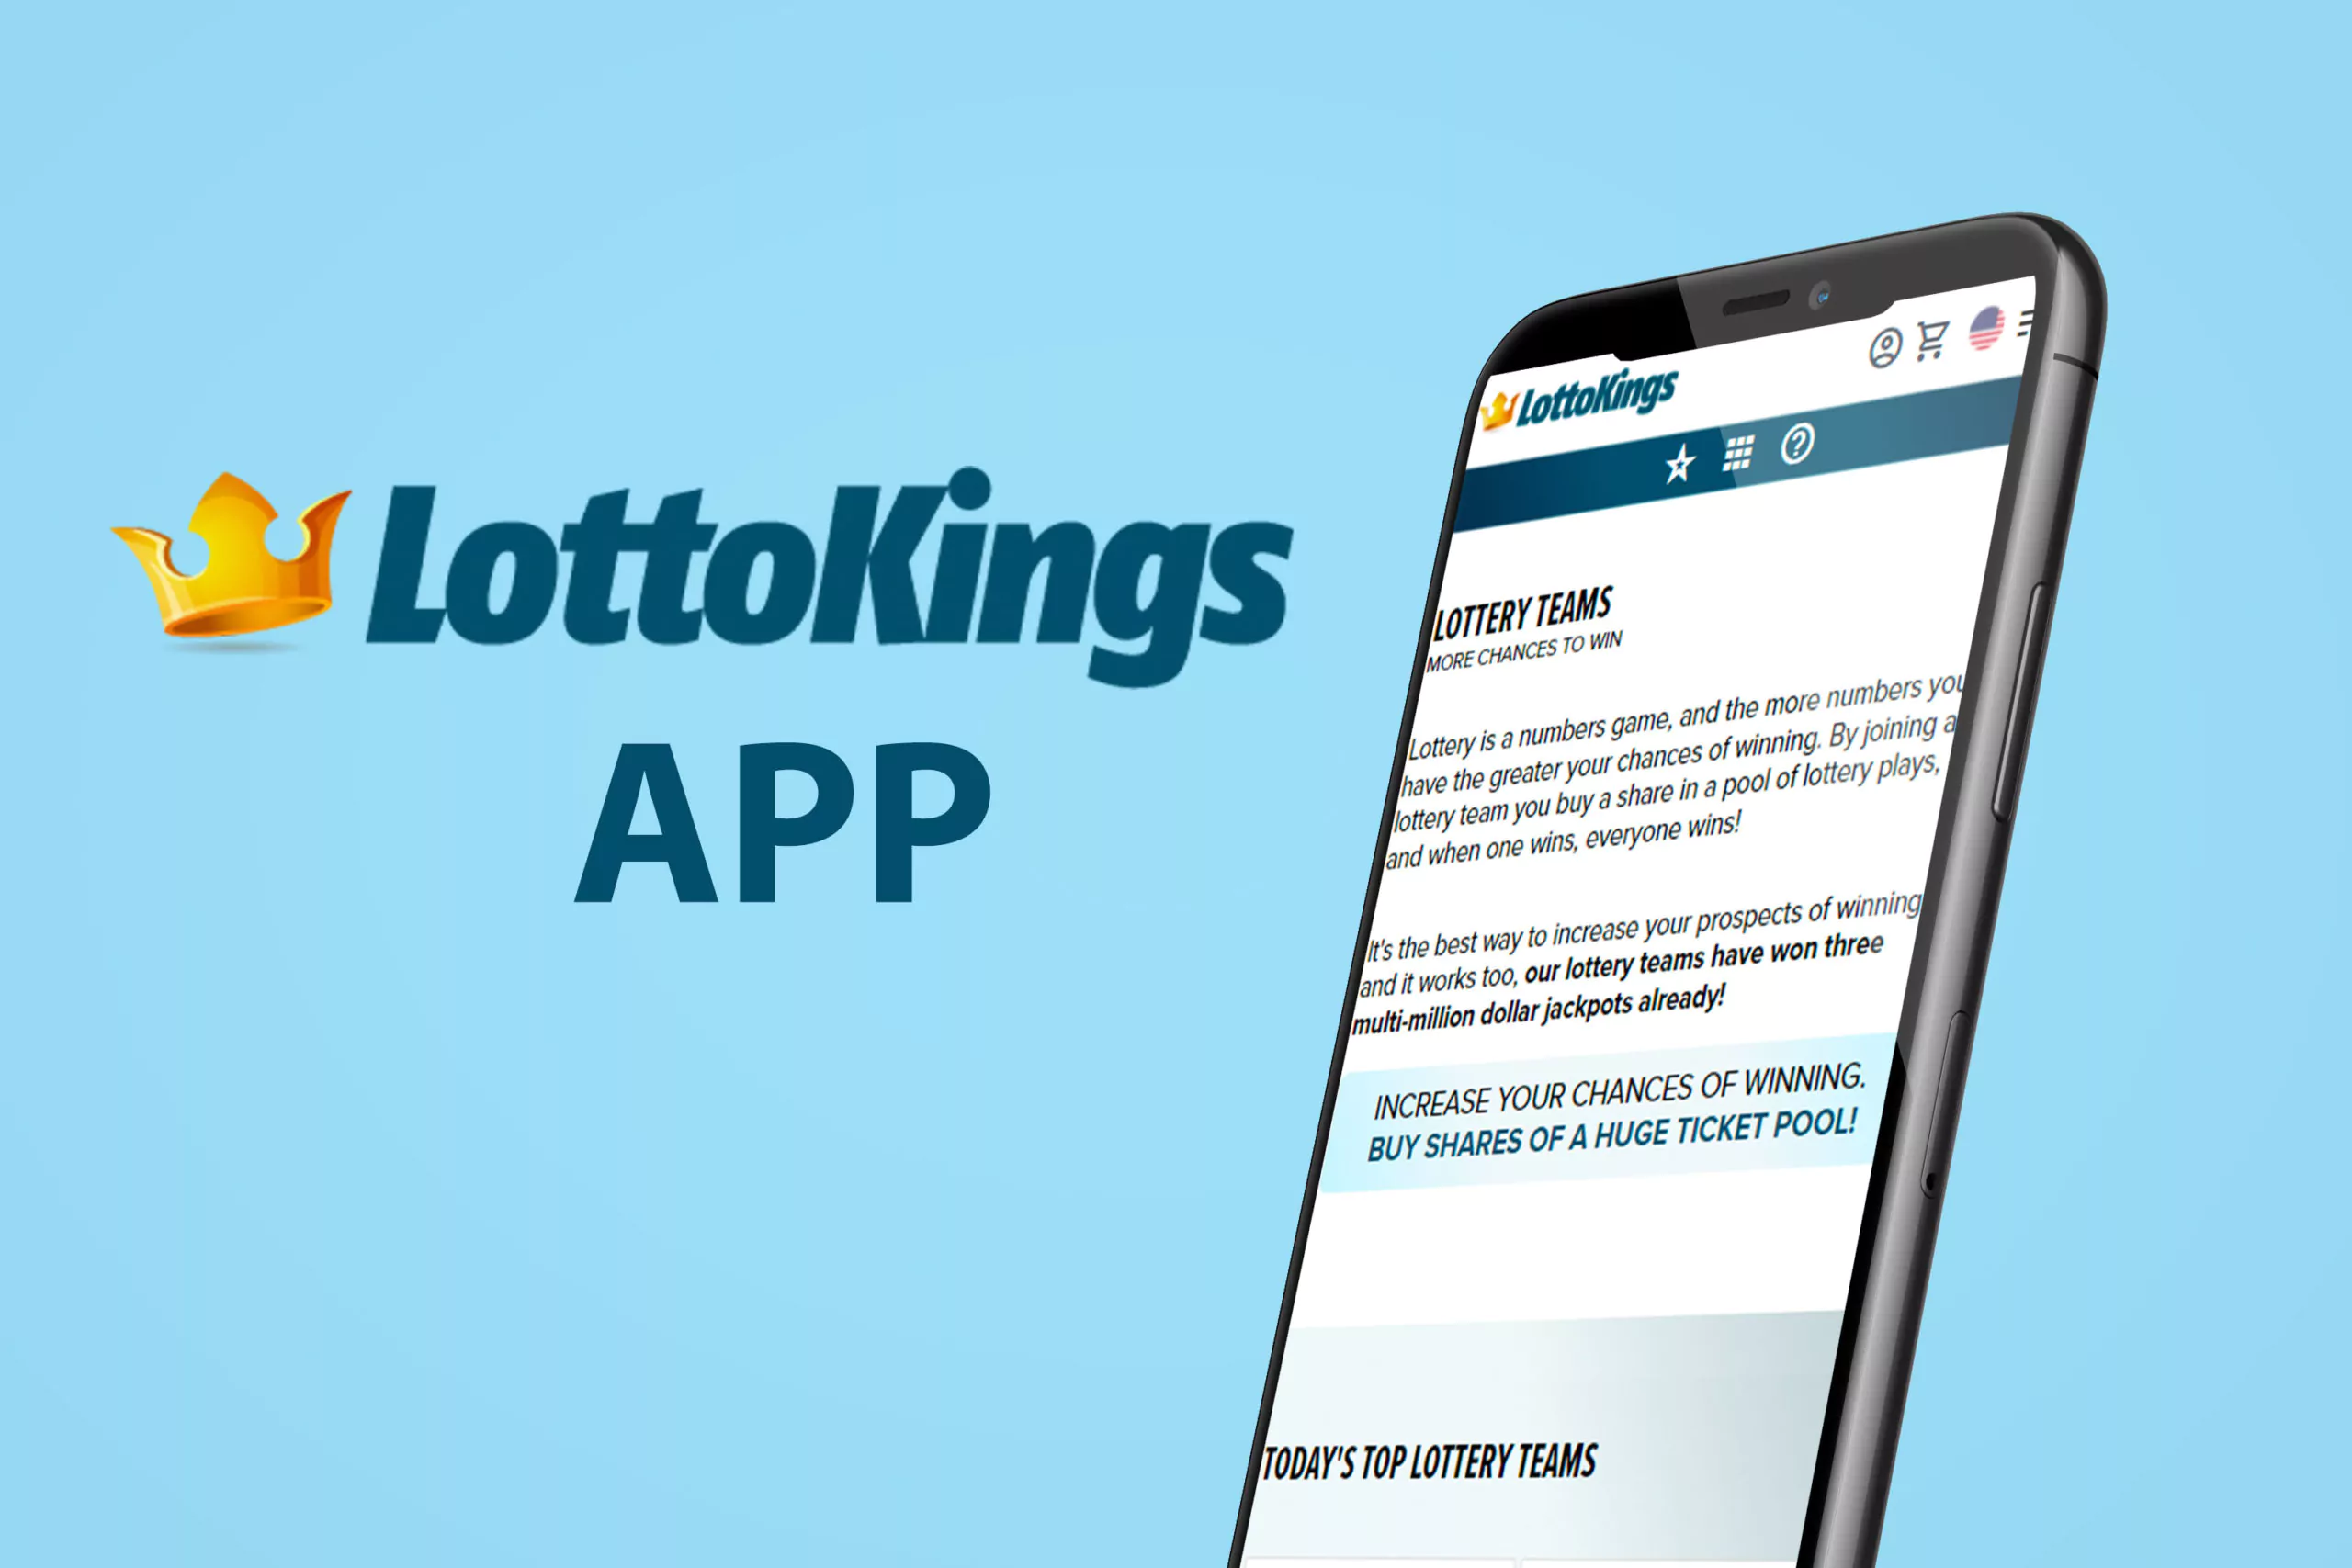 Experience the thrill of online lotteries in the LottoKings app.